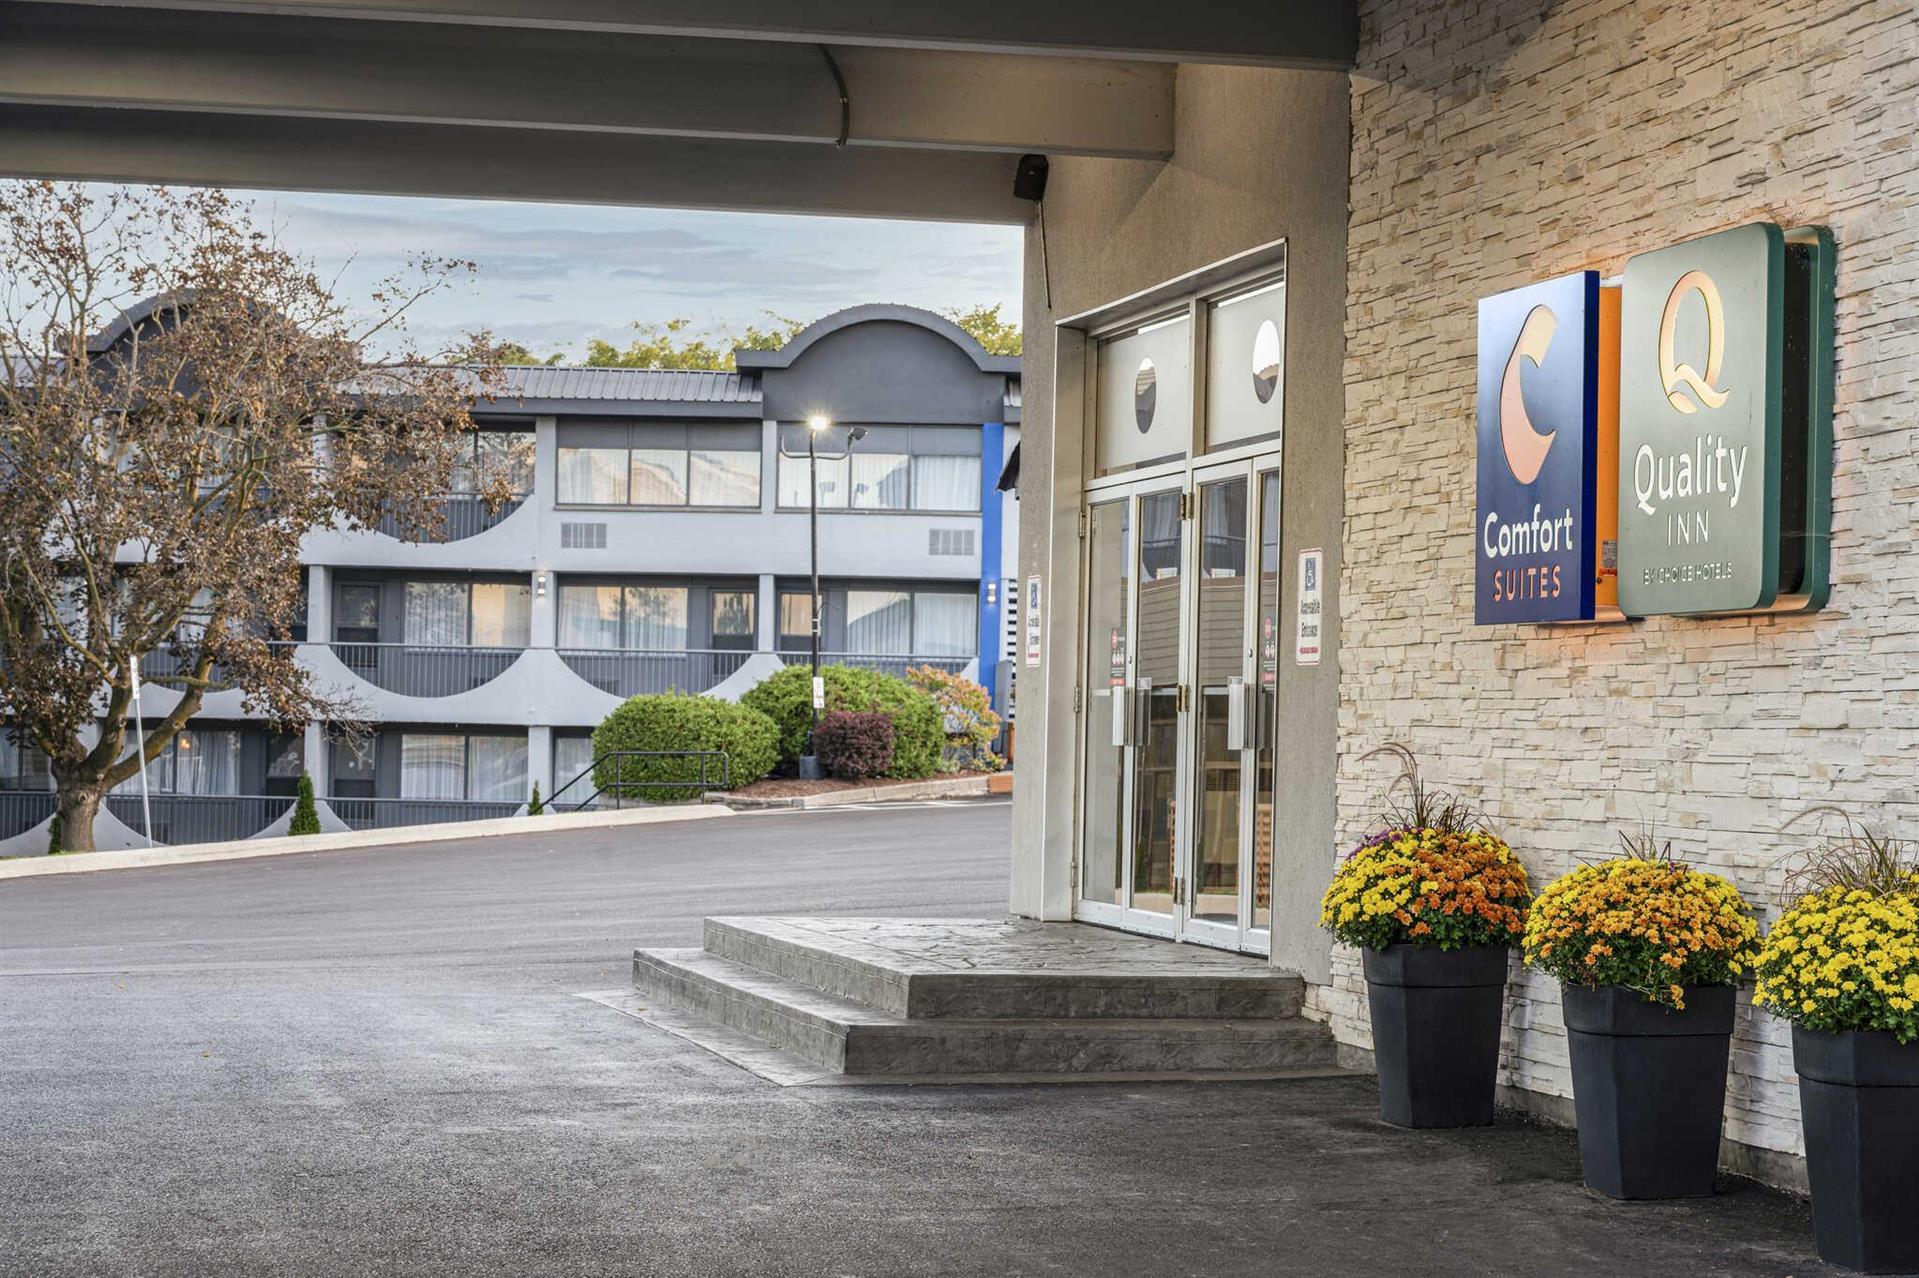 Quality Inn & Conference Centre Kingston Central in Kingston, ON